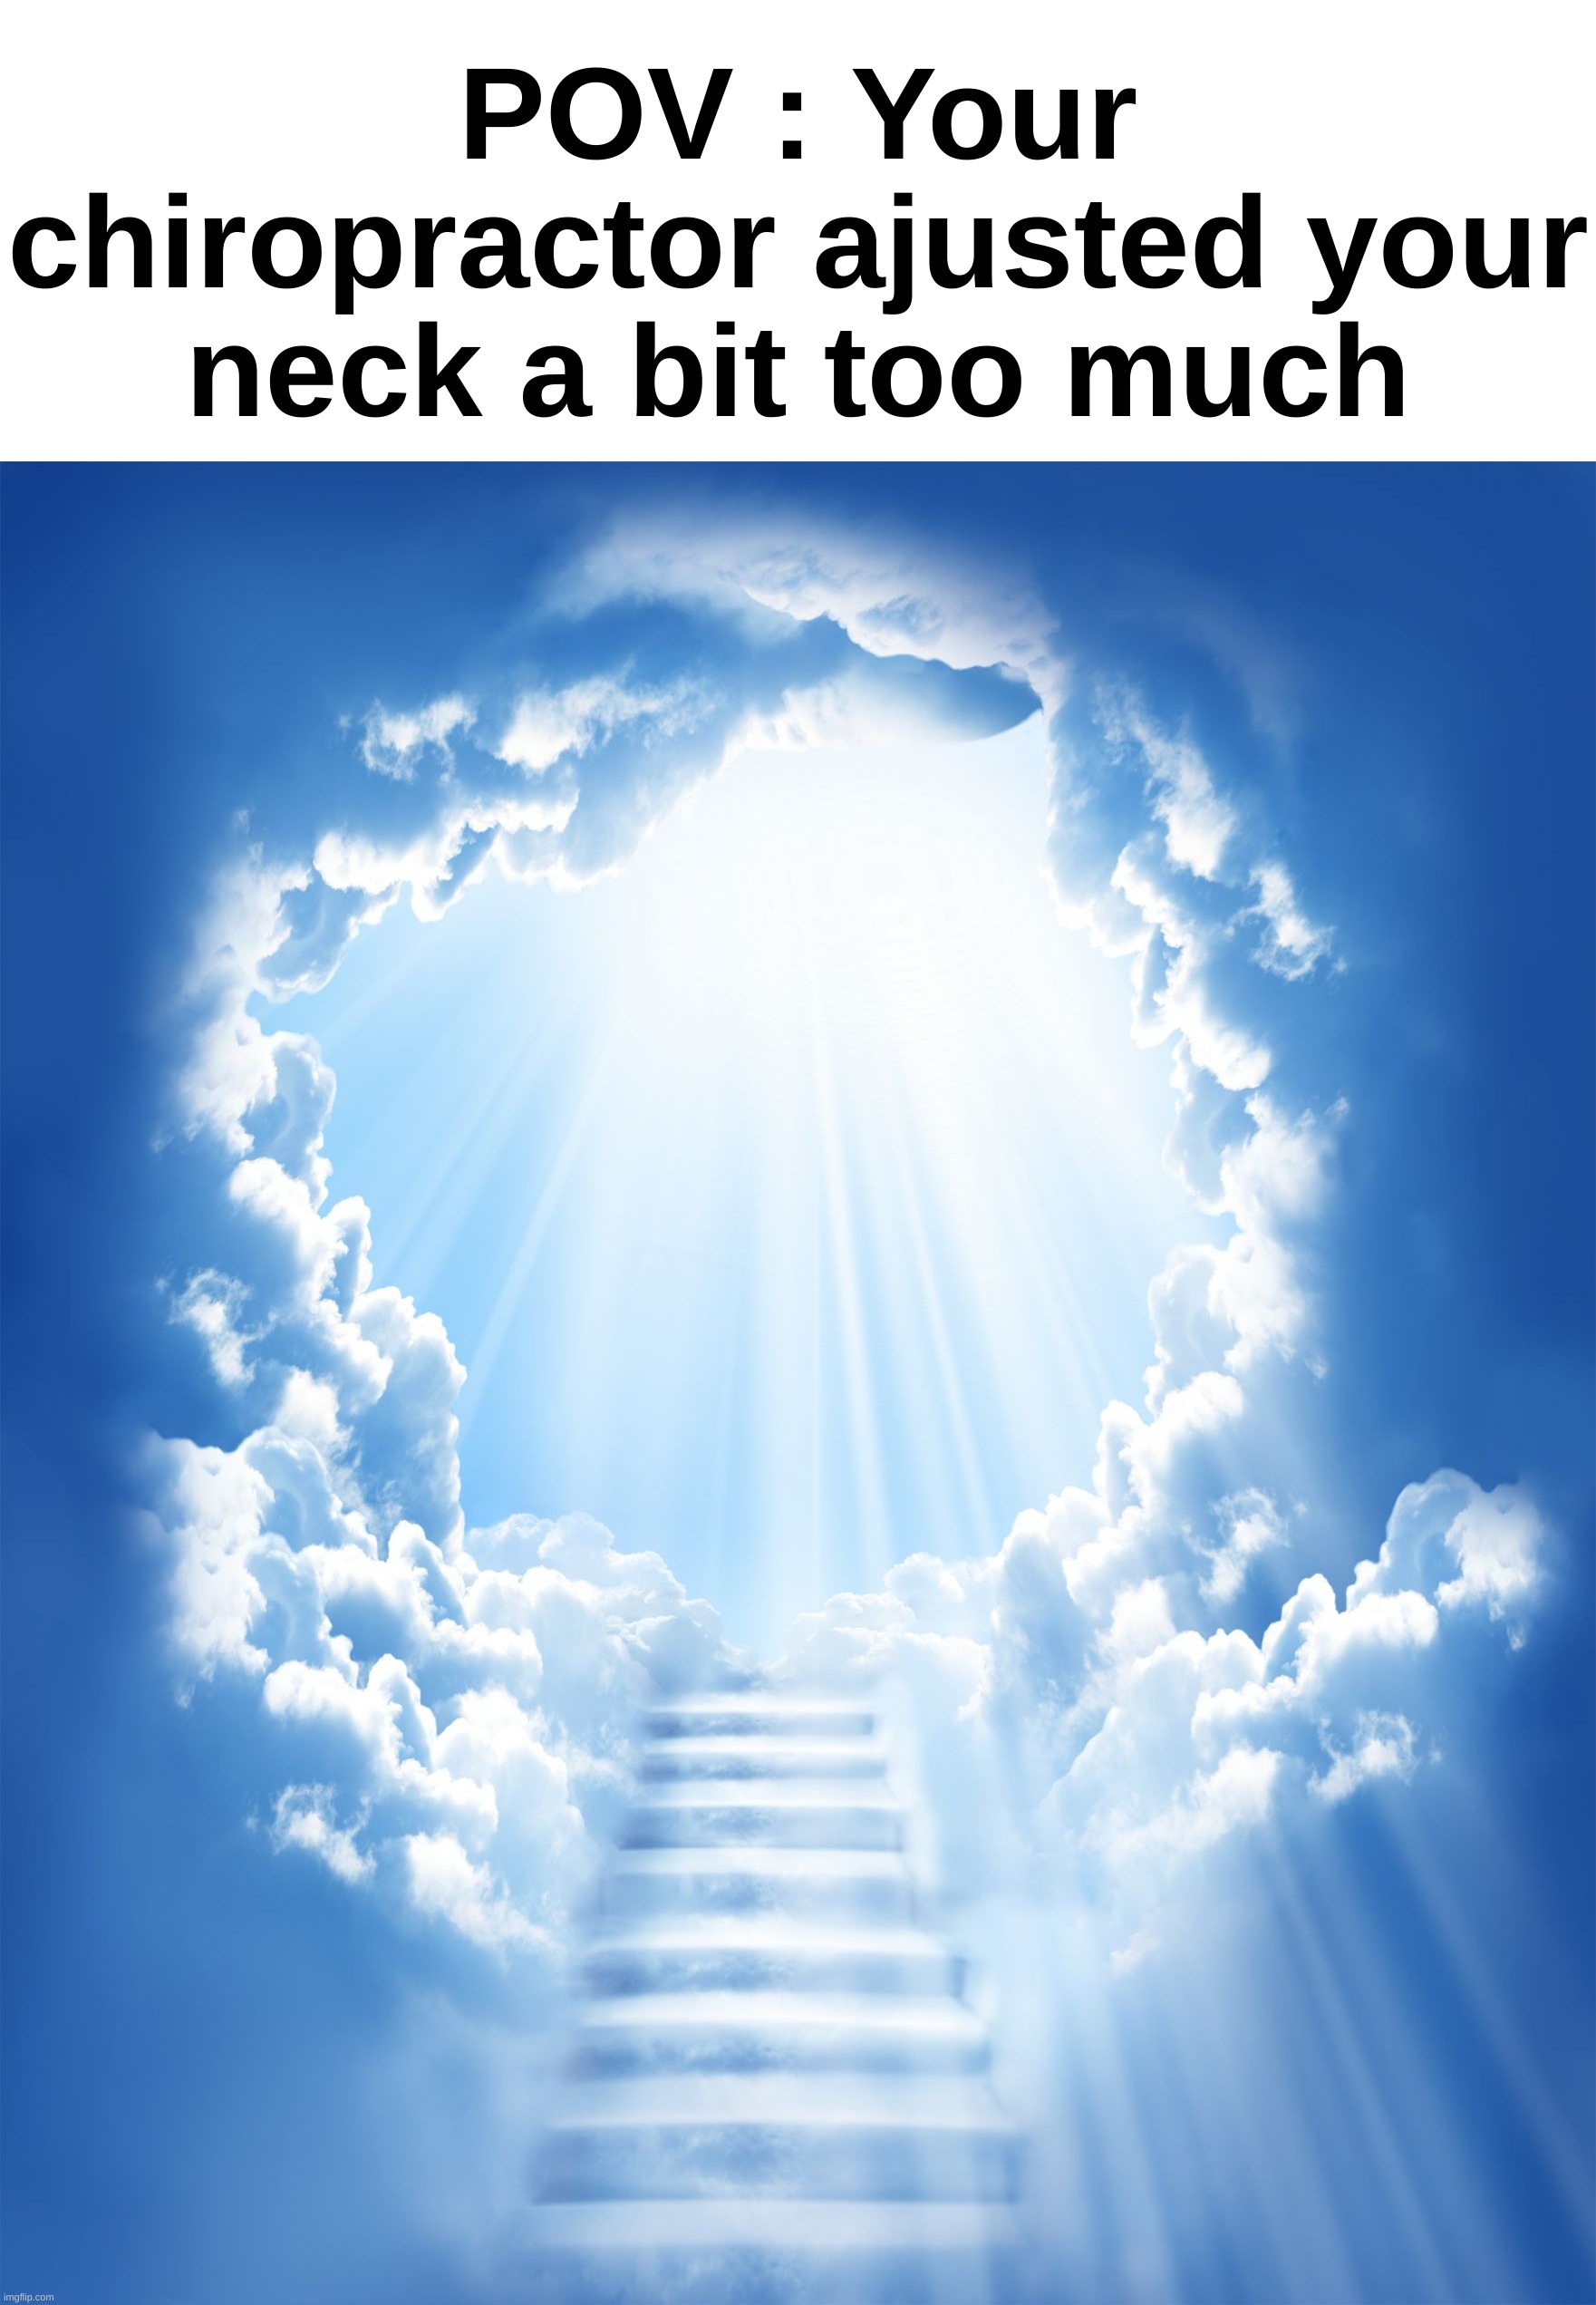 Rip me | POV : Your chiropractor ajusted your neck a bit too much | image tagged in memes,funny,relatable,heaven,chiropractor,front page plz | made w/ Imgflip meme maker